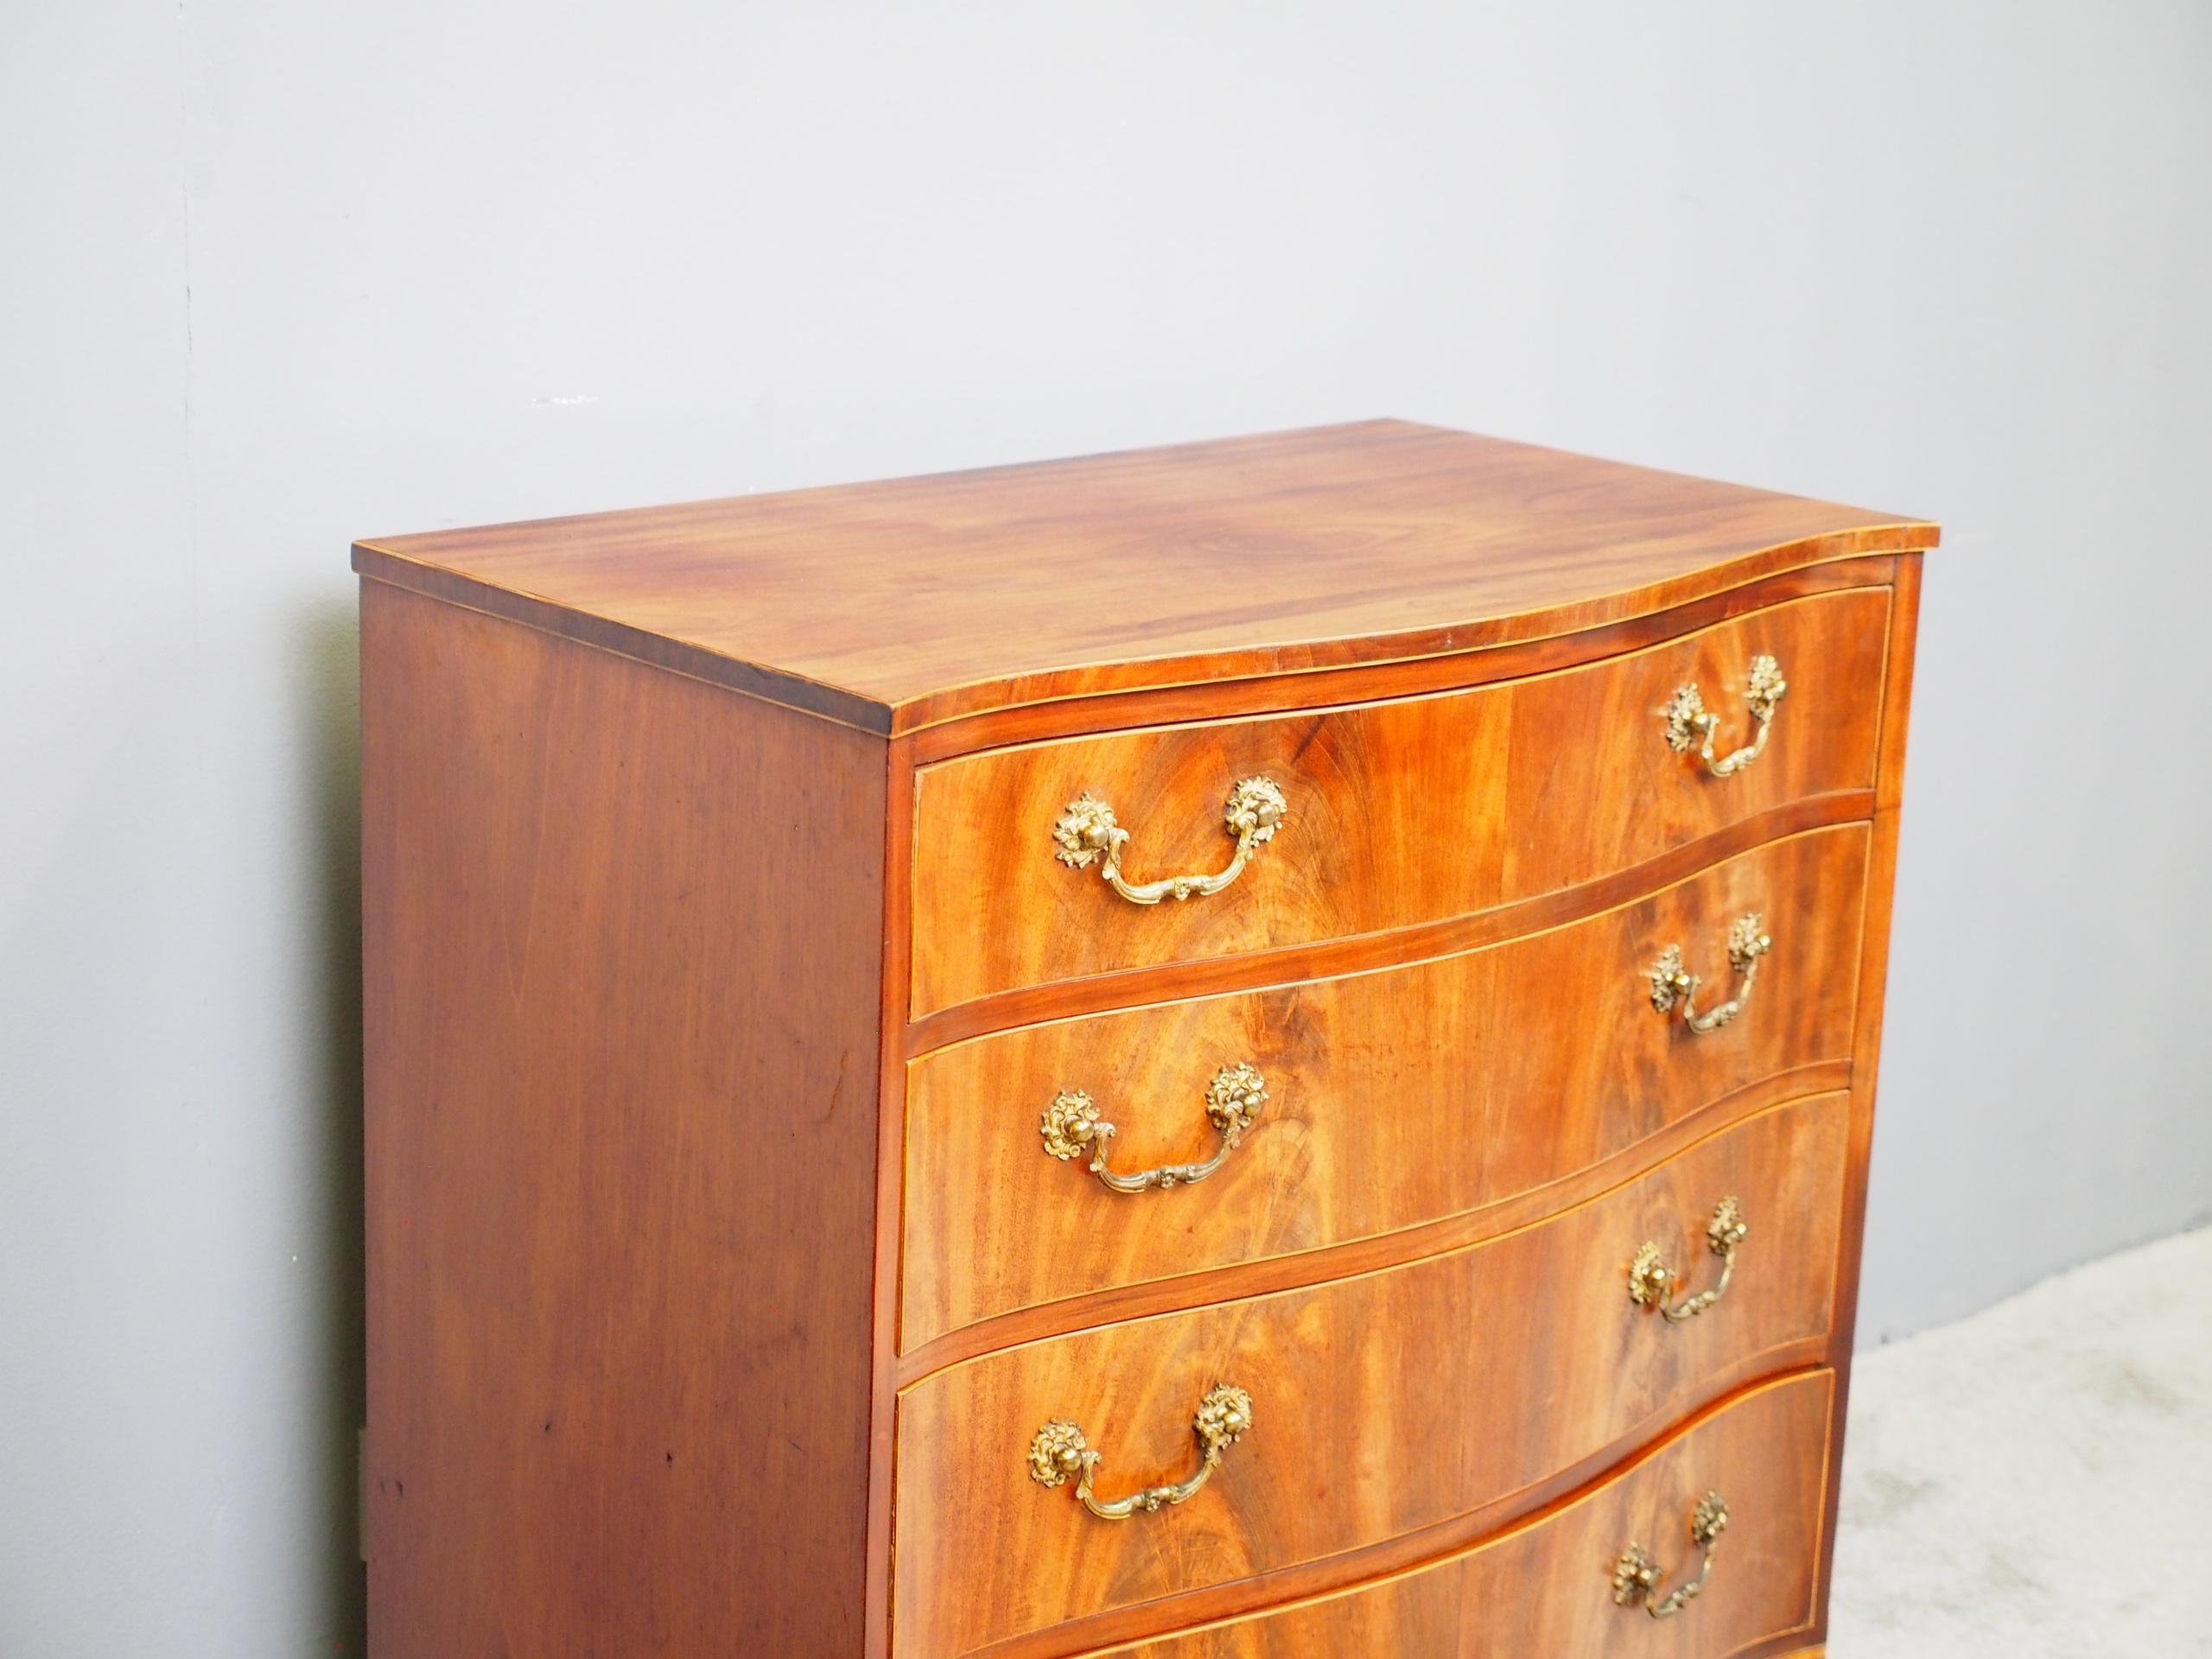 Hepplewhite style, inlaid mahogany, serpentine fronted chest of drawers, circa 1850. The shaped top in figured mahogany has a boxwood inlaid cross-banded fore-edge and is over four inlaid, graduated drawers. These are in flame mahogany and all have